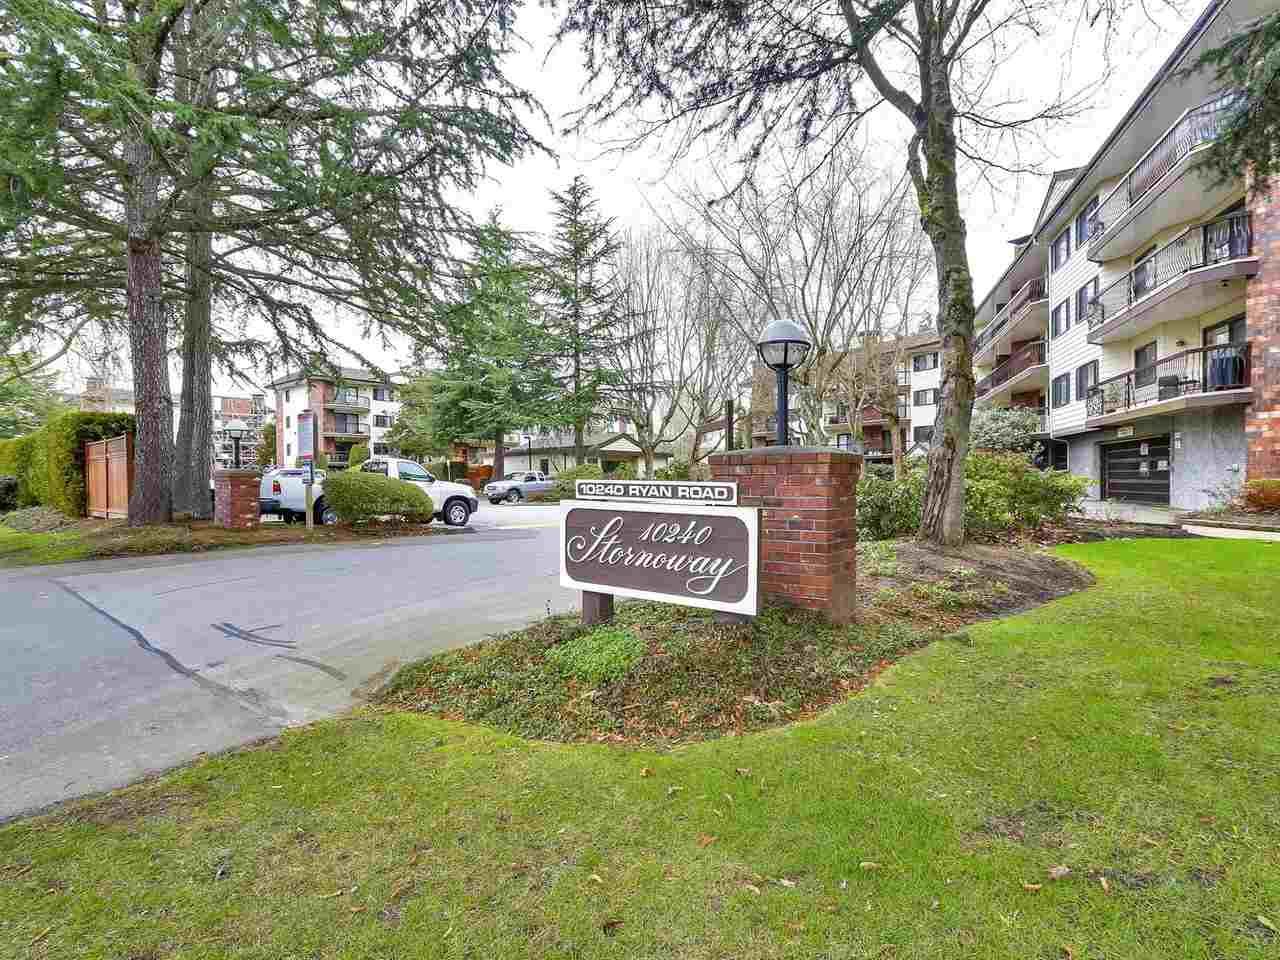 Main Photo: 302 10220 RYAN ROAD in : South Arm Condo for sale : MLS®# R2239261